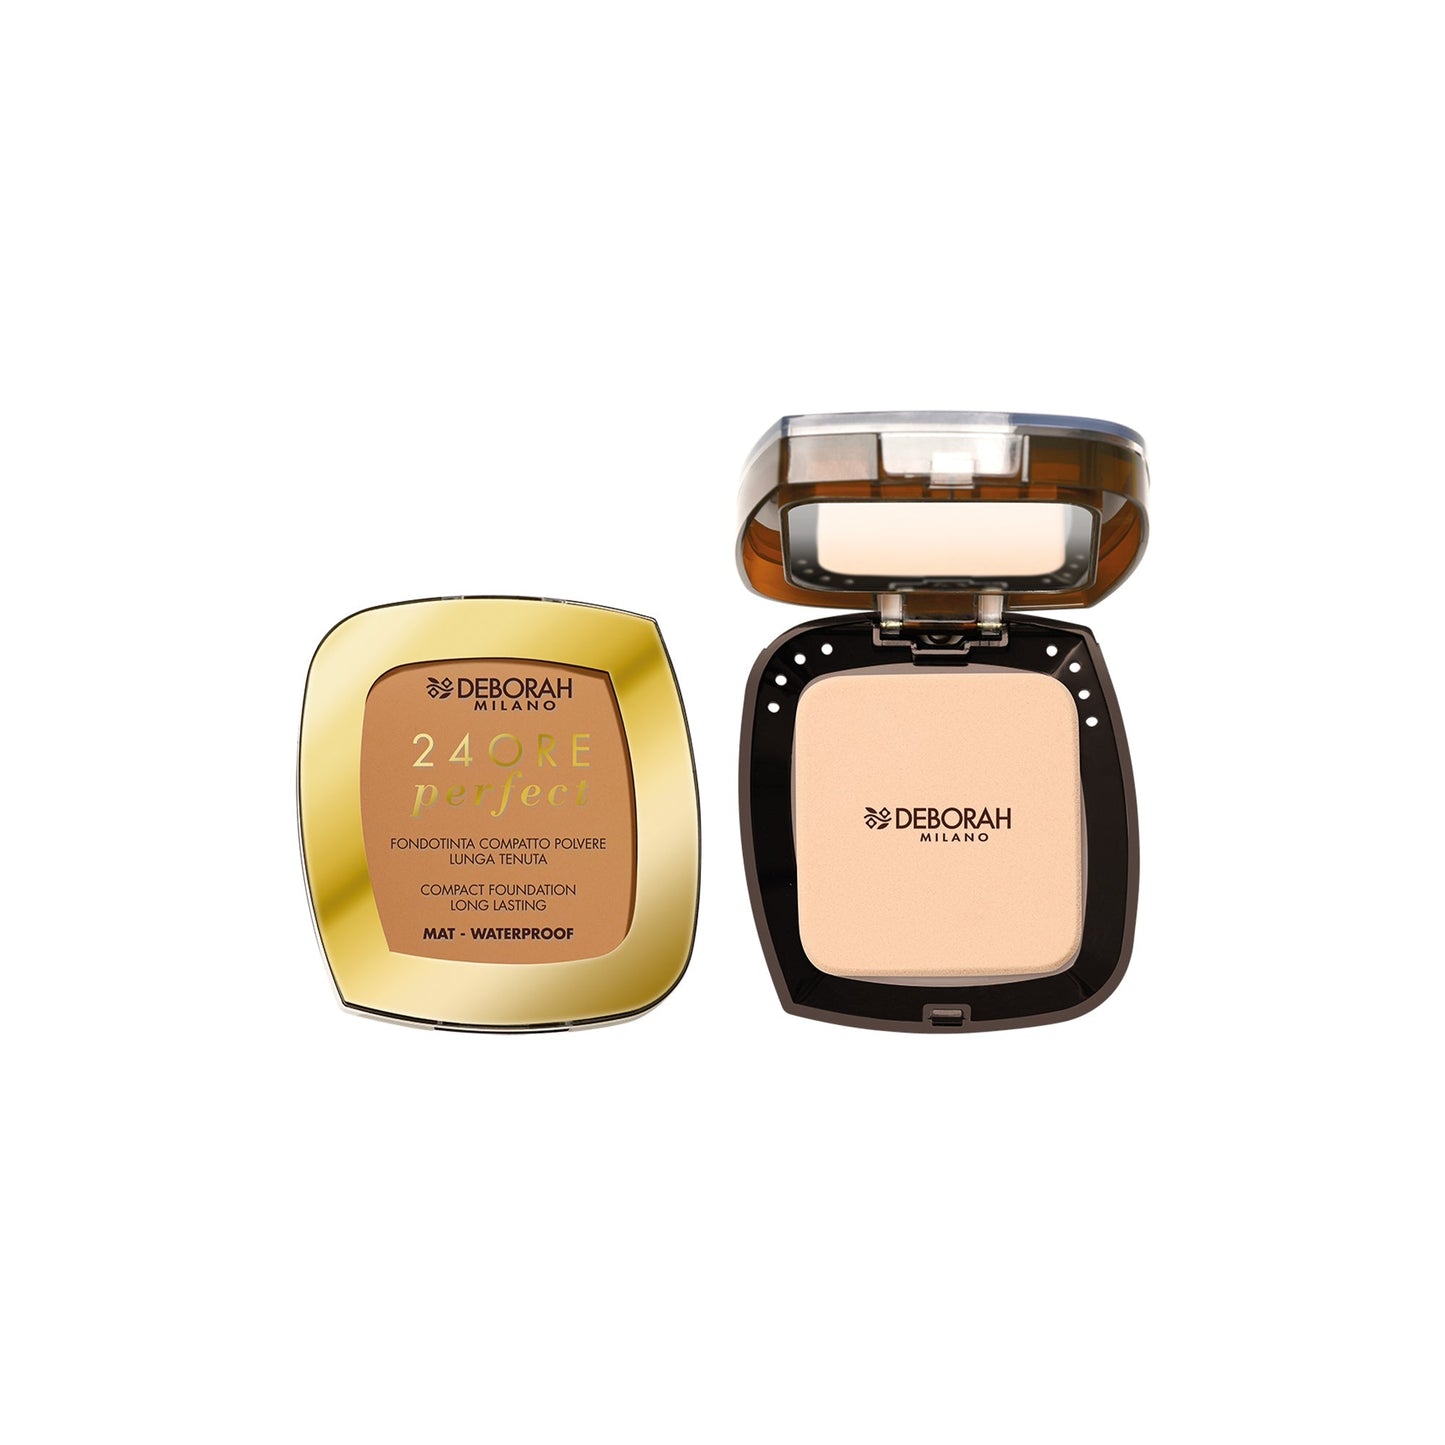 24 Ore Perfect - Compact Foundation Long-lasting